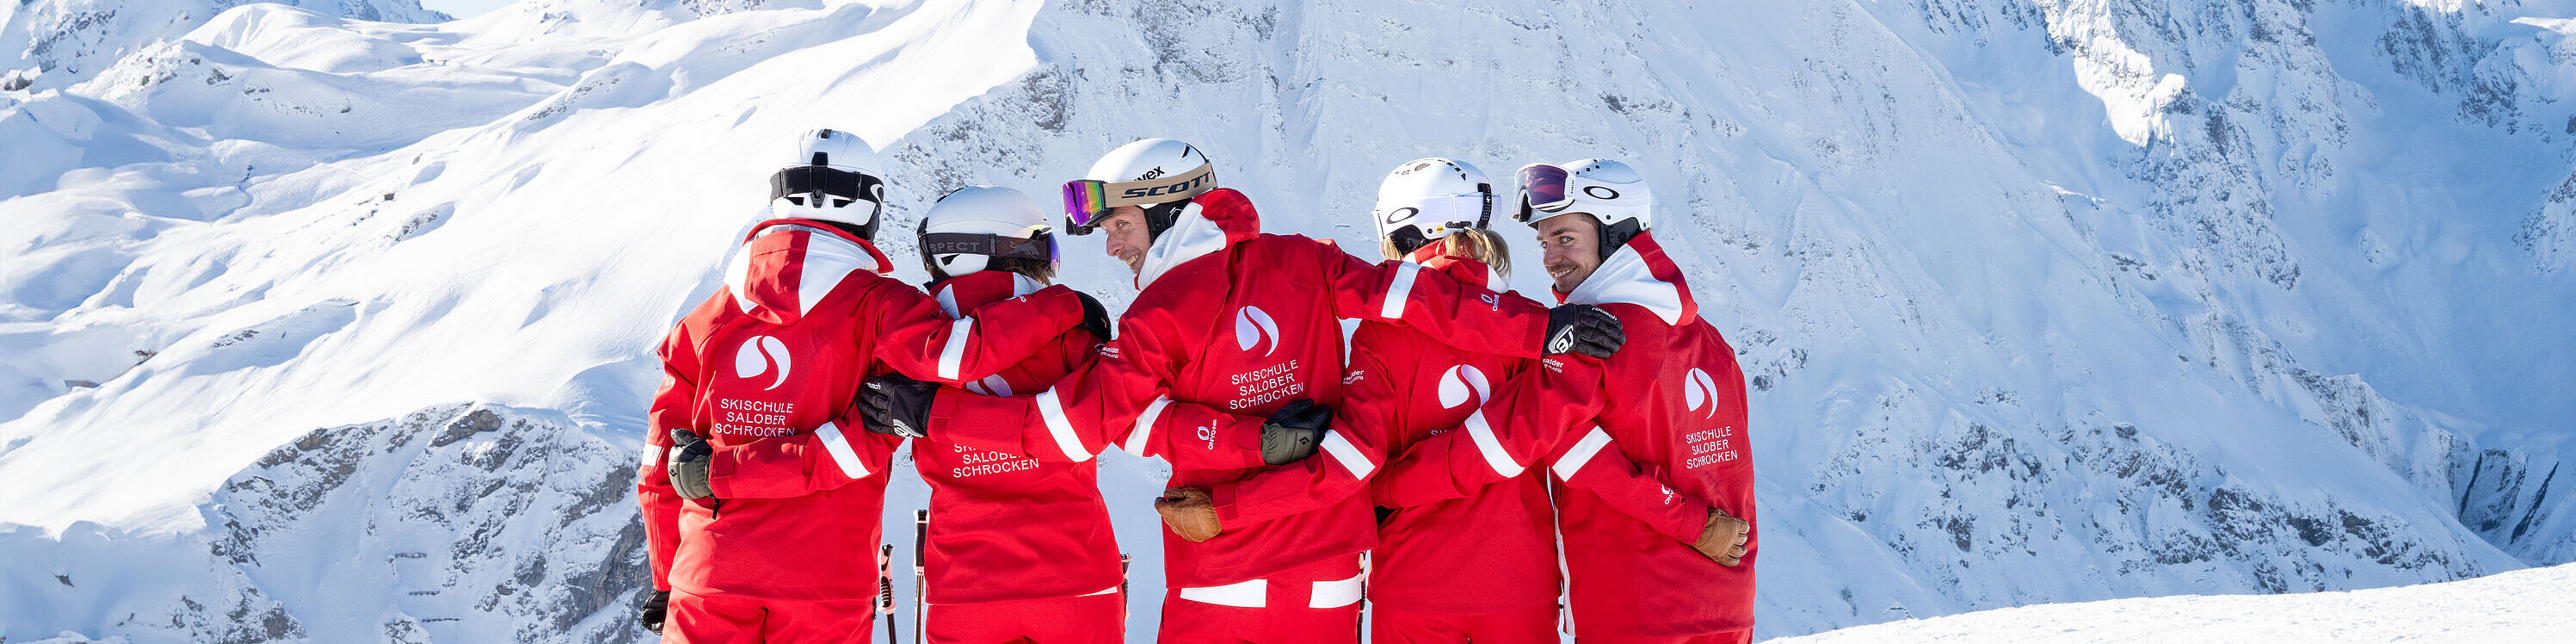 With their backs to the camera, a group of ski instructors are standing arm in arm